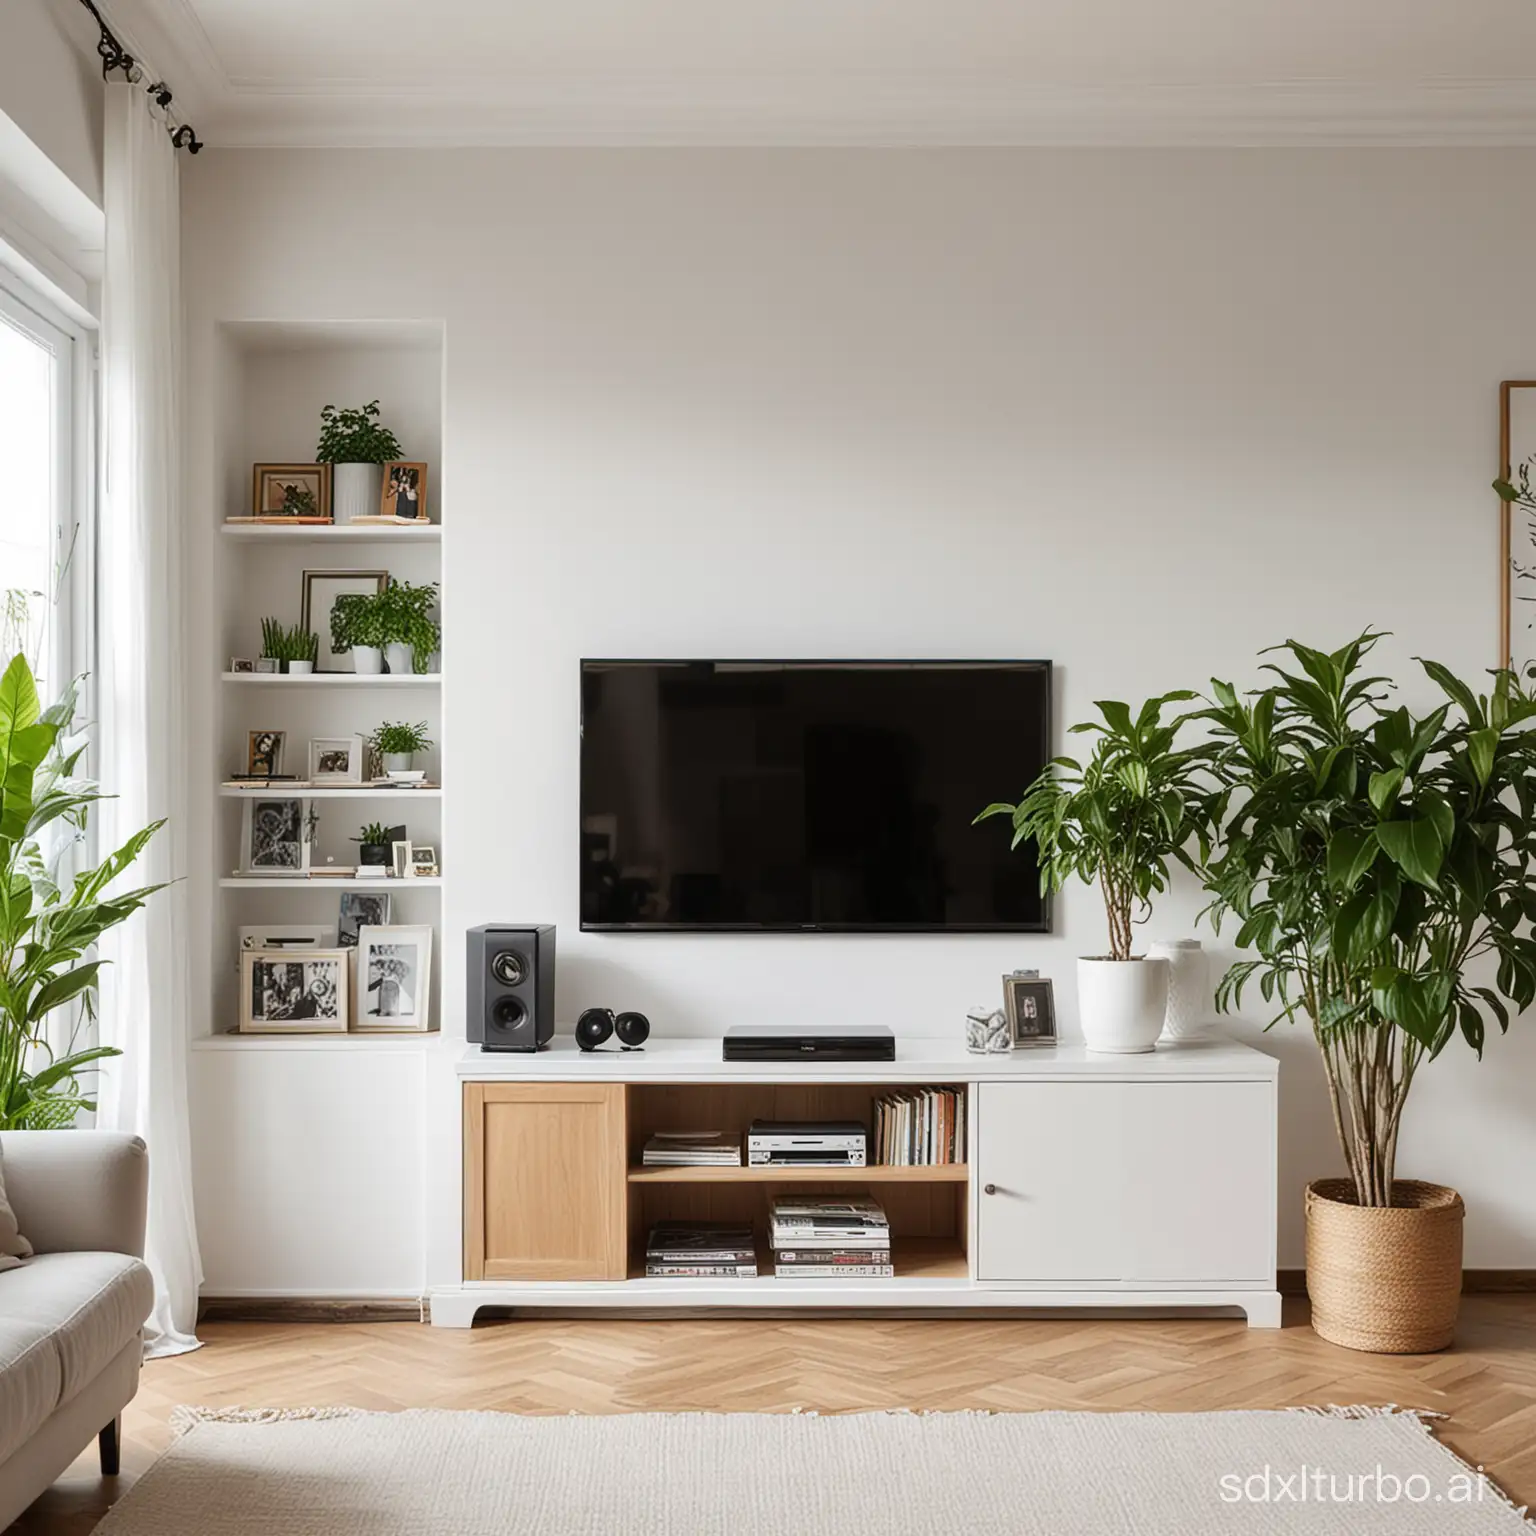 White walls, European-style living room, TV cabinet, green plants, records, sunlight, close-up, front